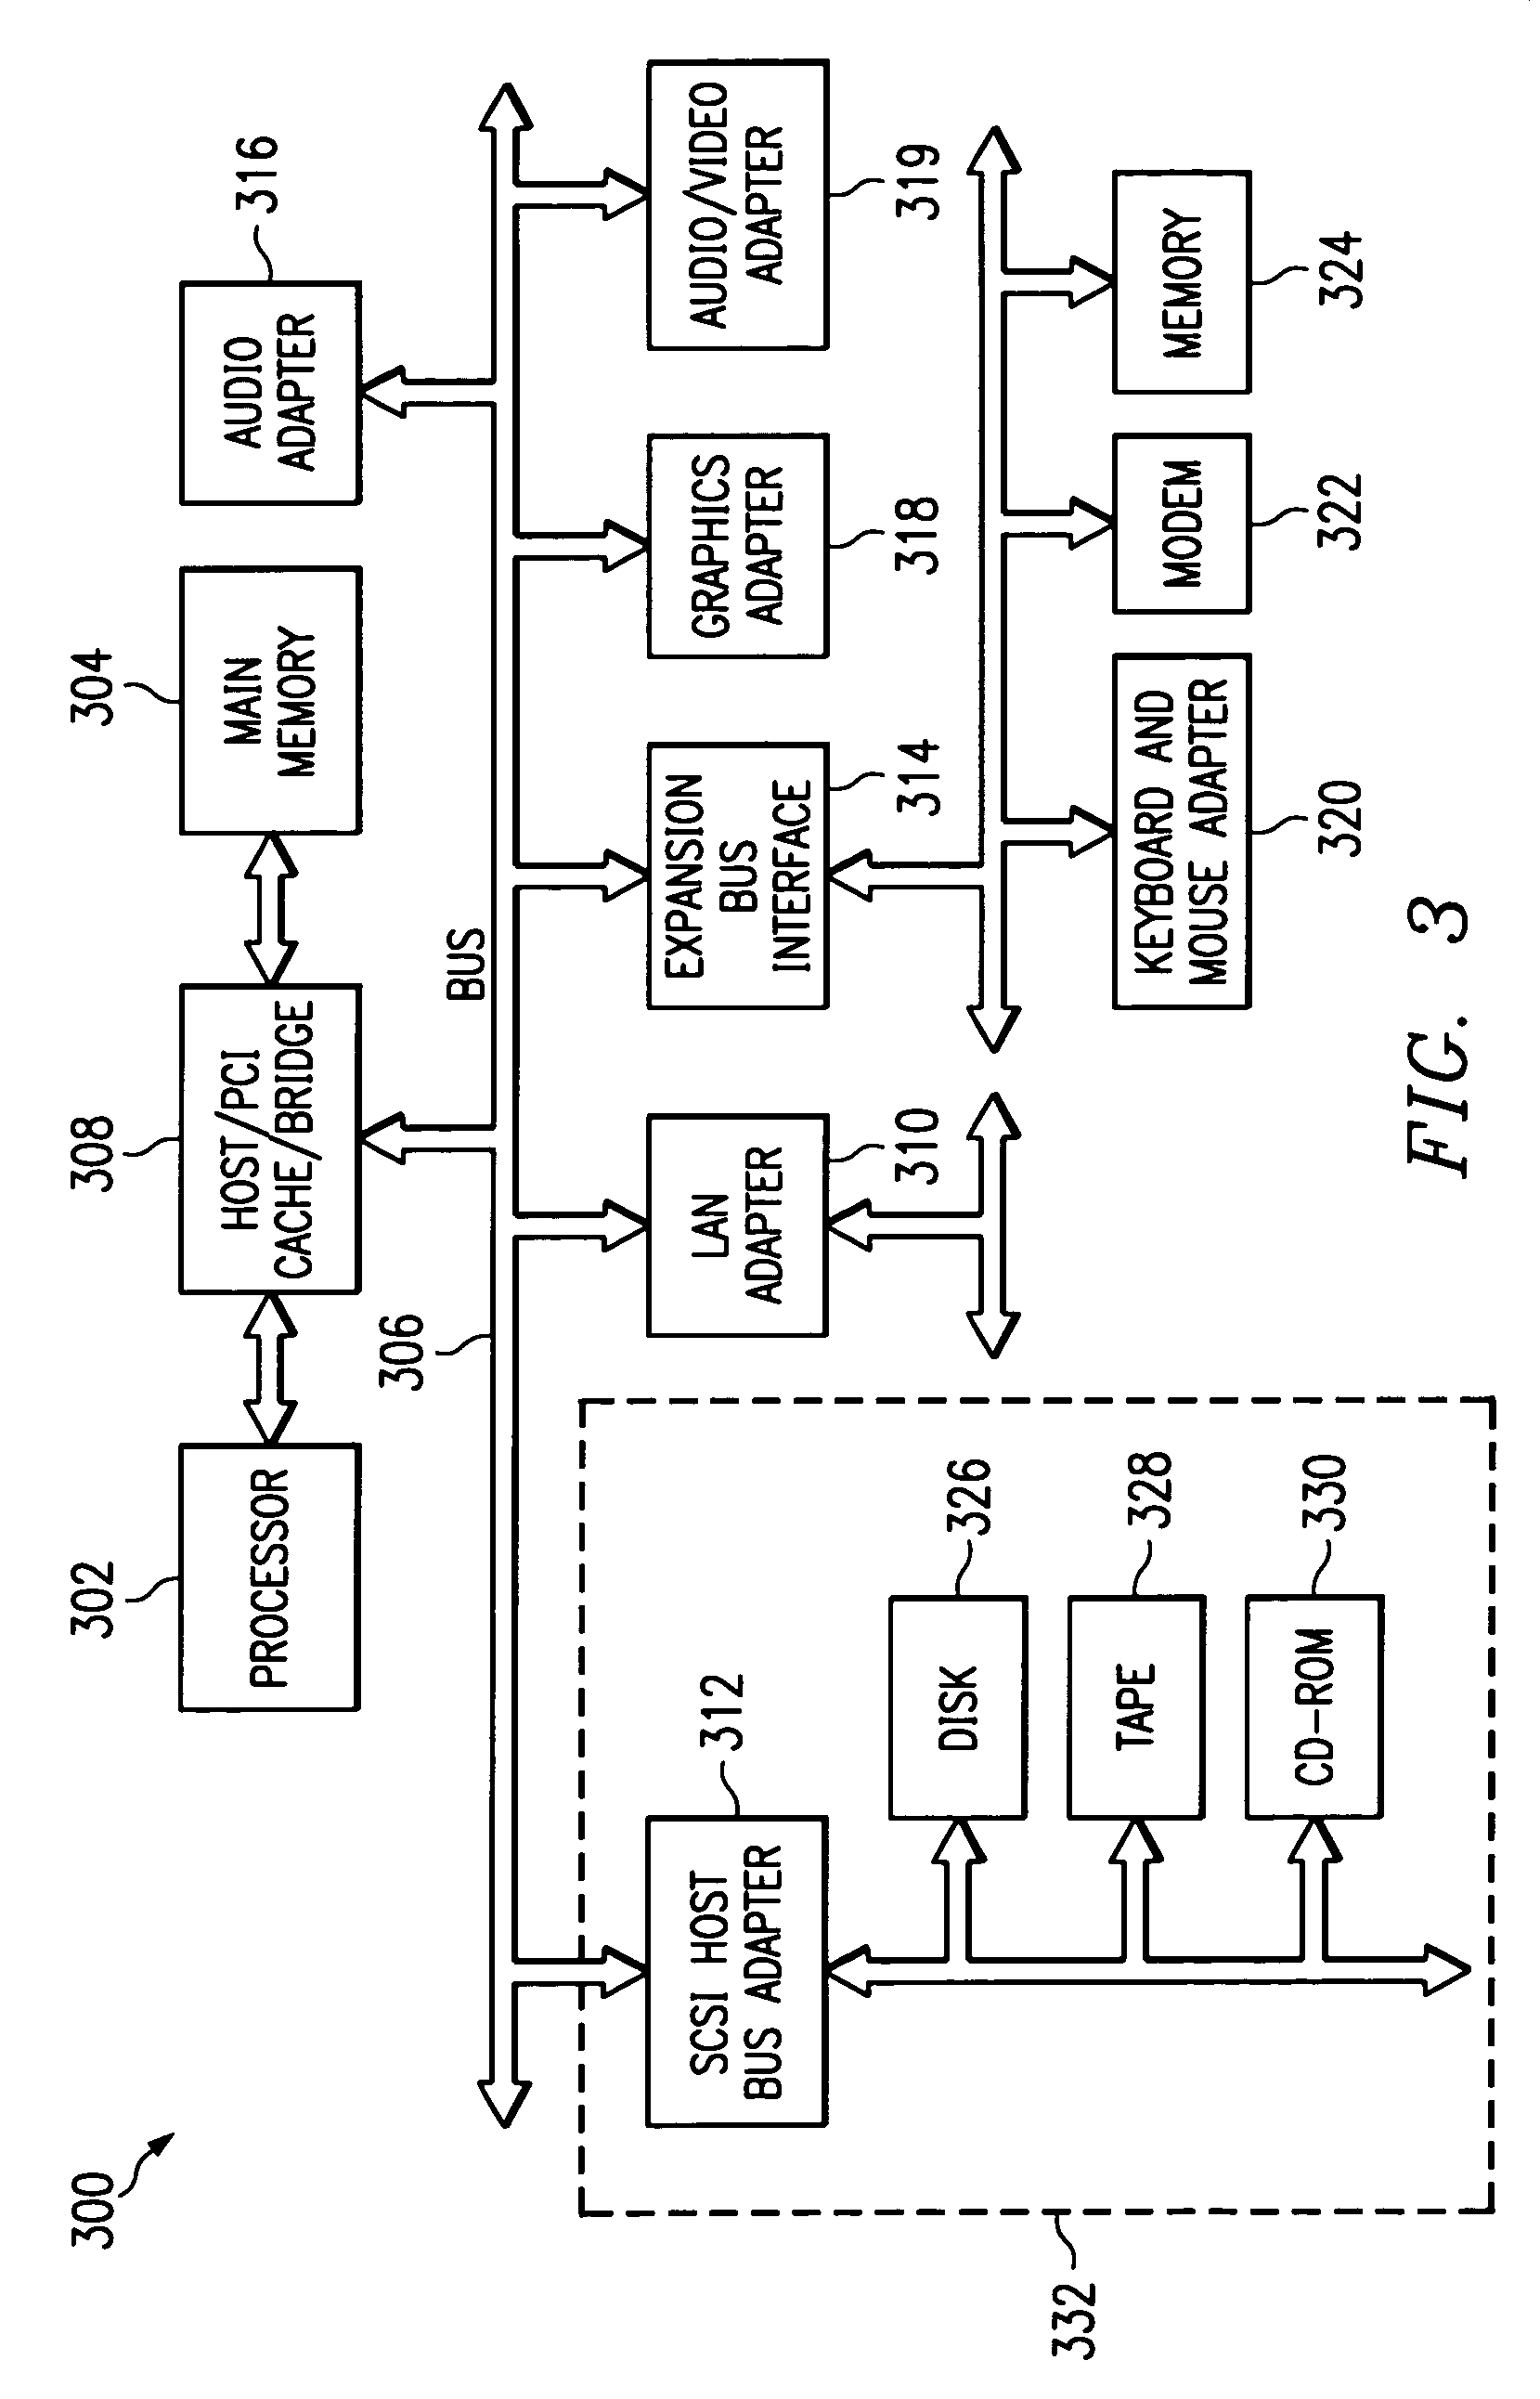 Apparatus and method for deletion of objects from an object-relational system in a customizable and database independent manner